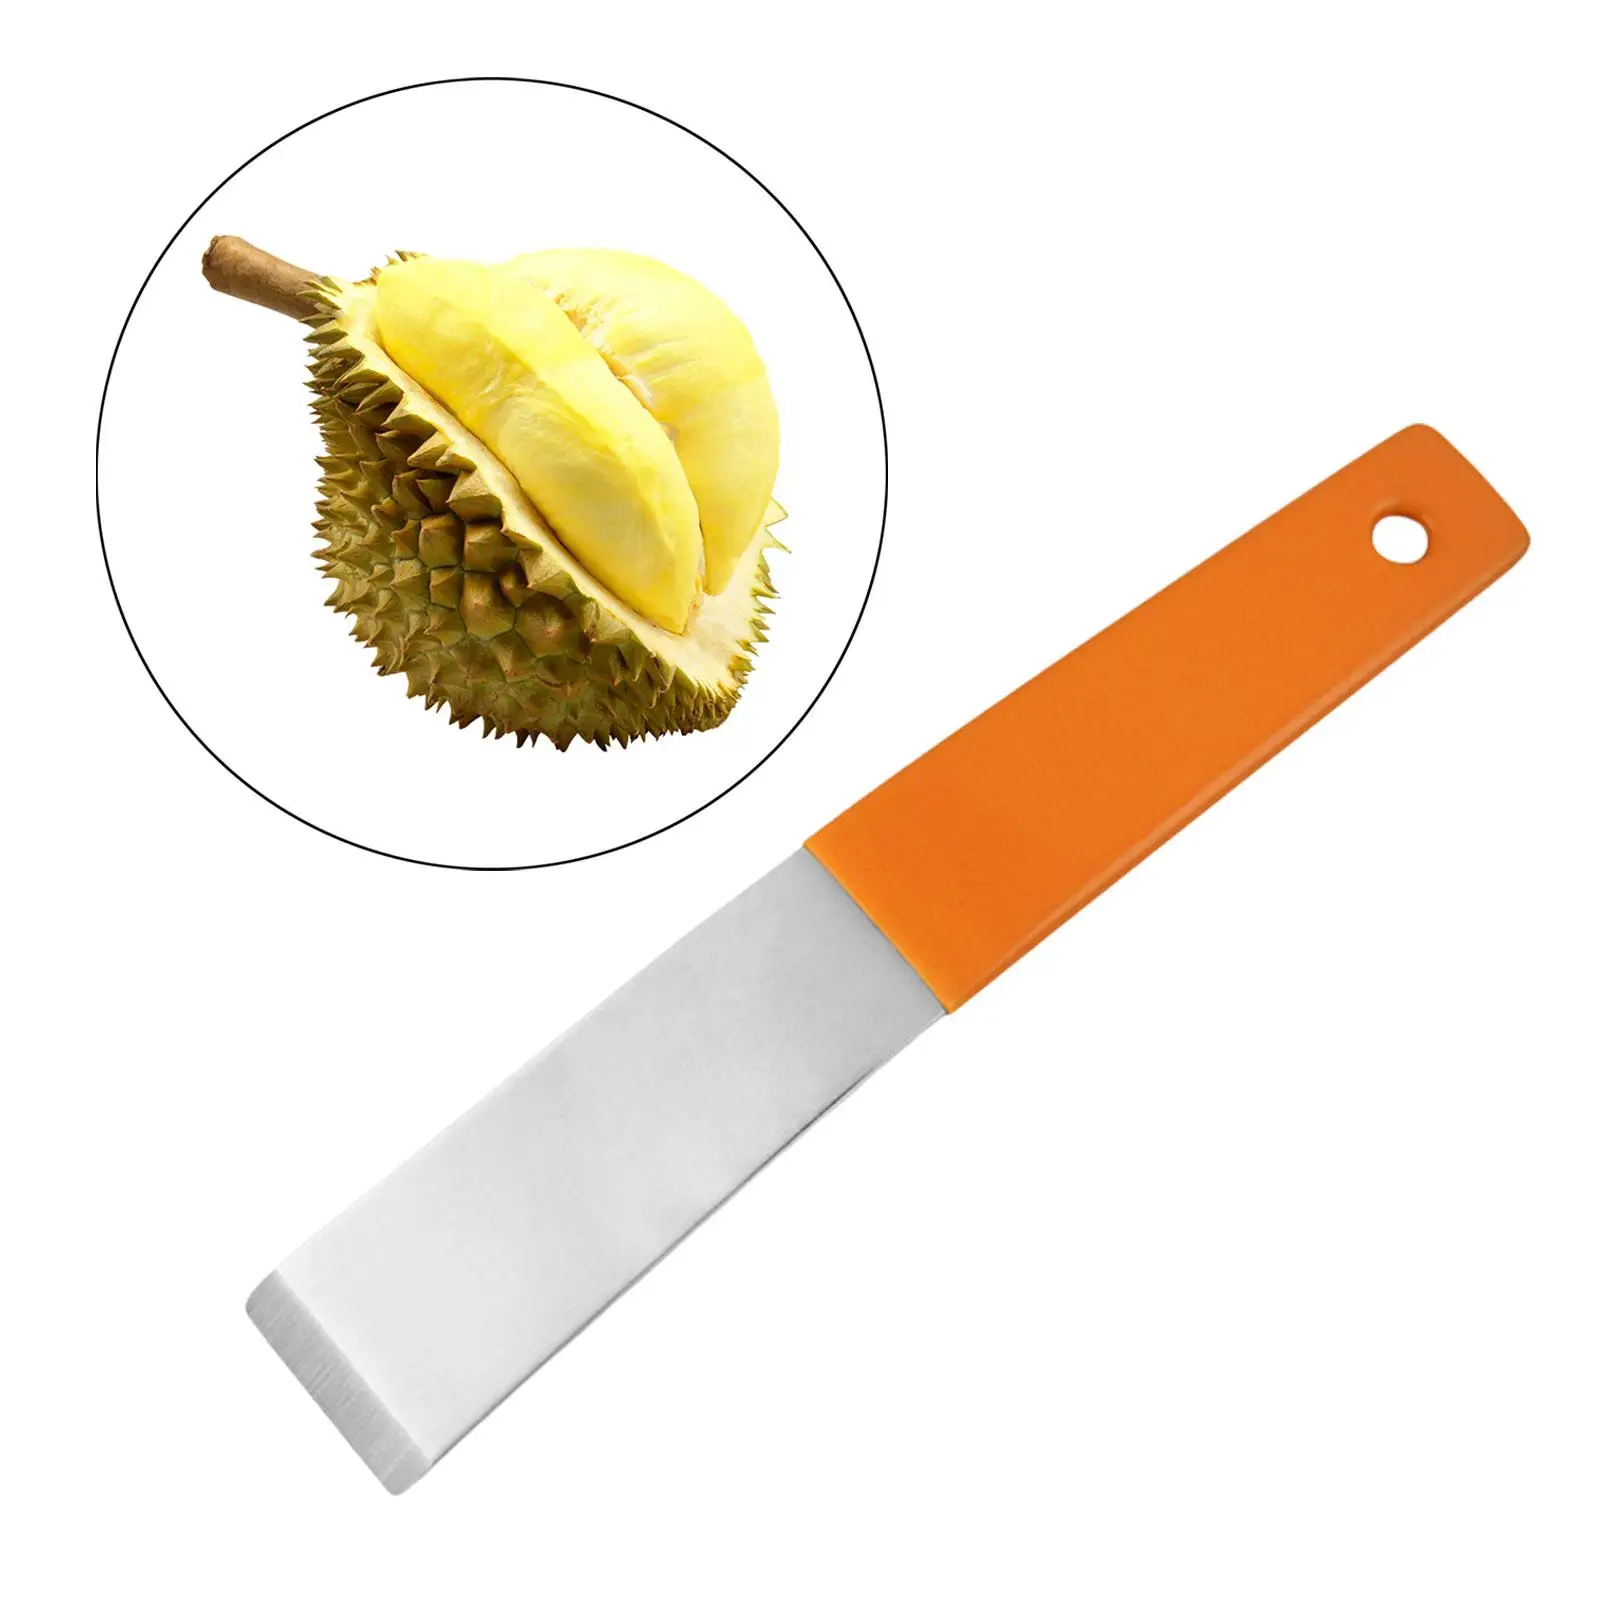 Fruit Durian Shell Opener Durable Peeling Smooth Stainless Steel Durian Opener for Camping Household Fruits Shop Gadget Utensils